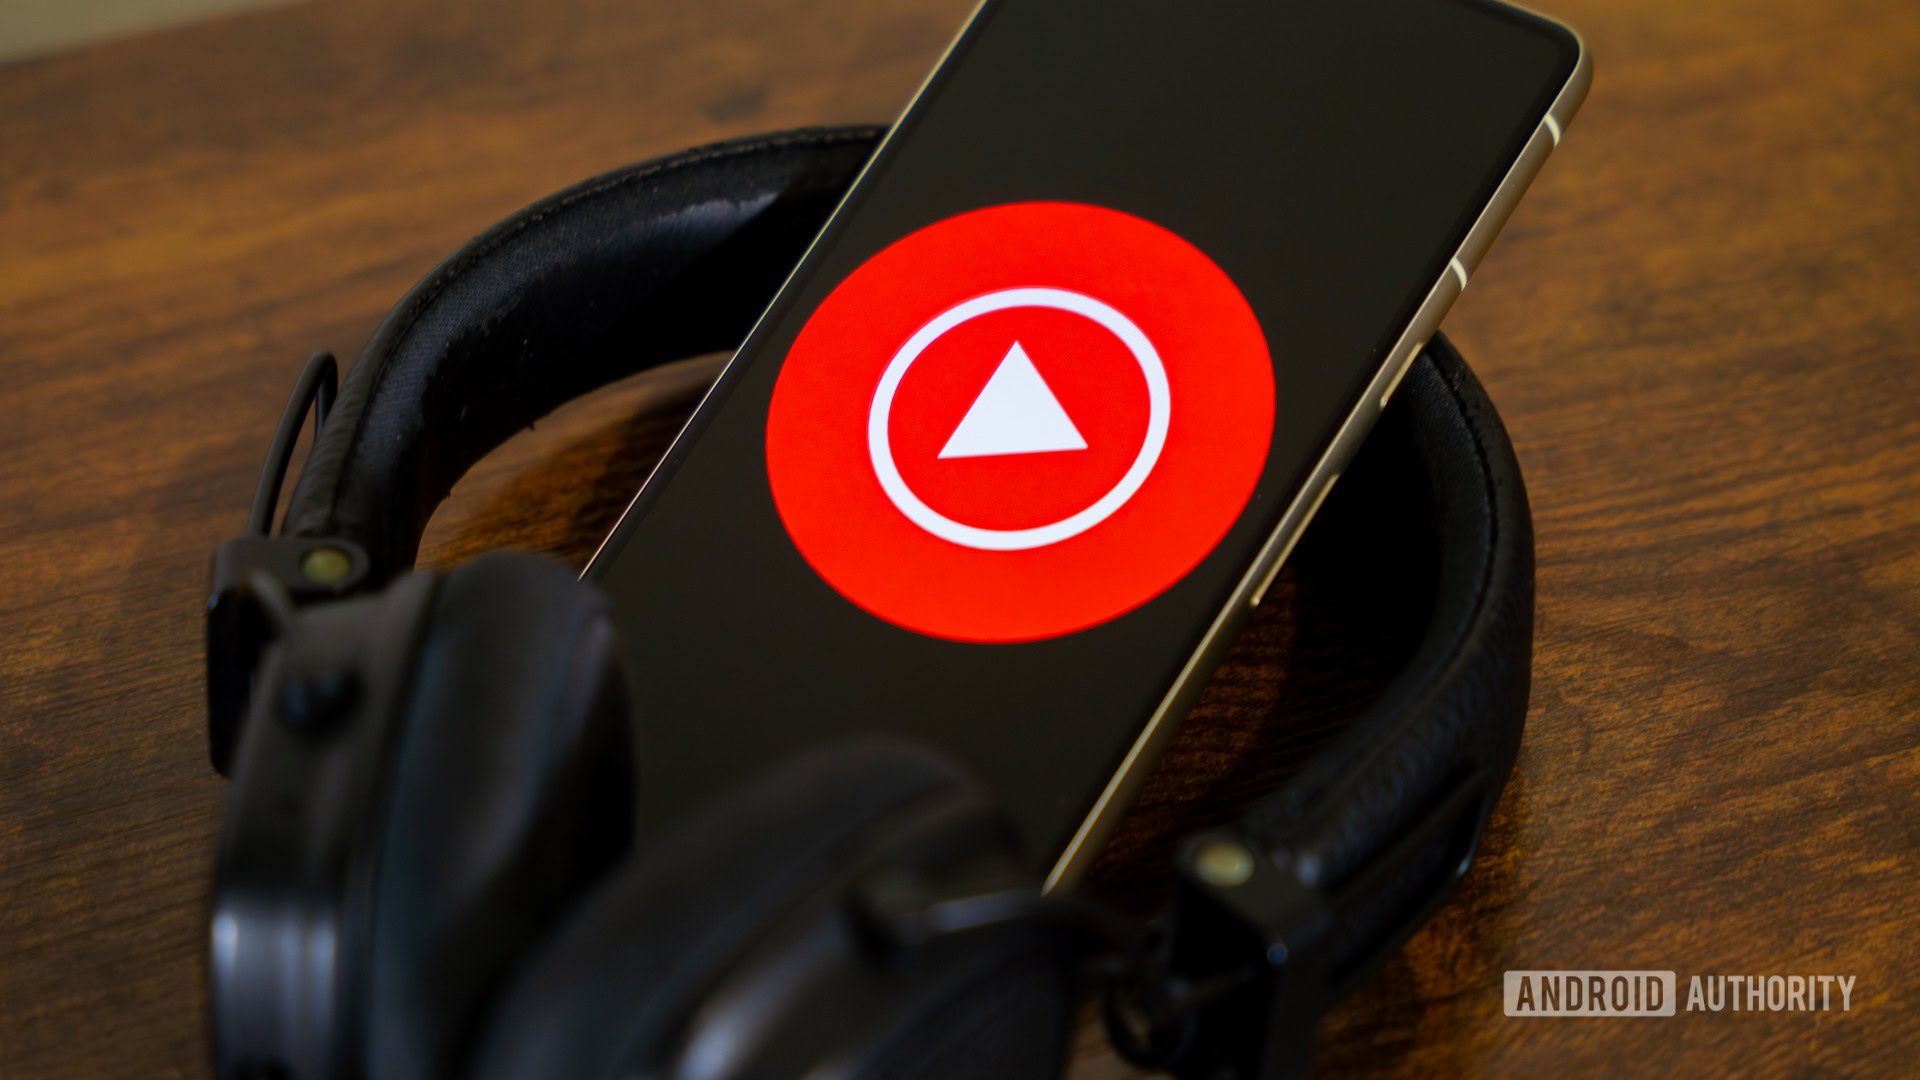 Gemini can now find, play, and control music from YouTube Music